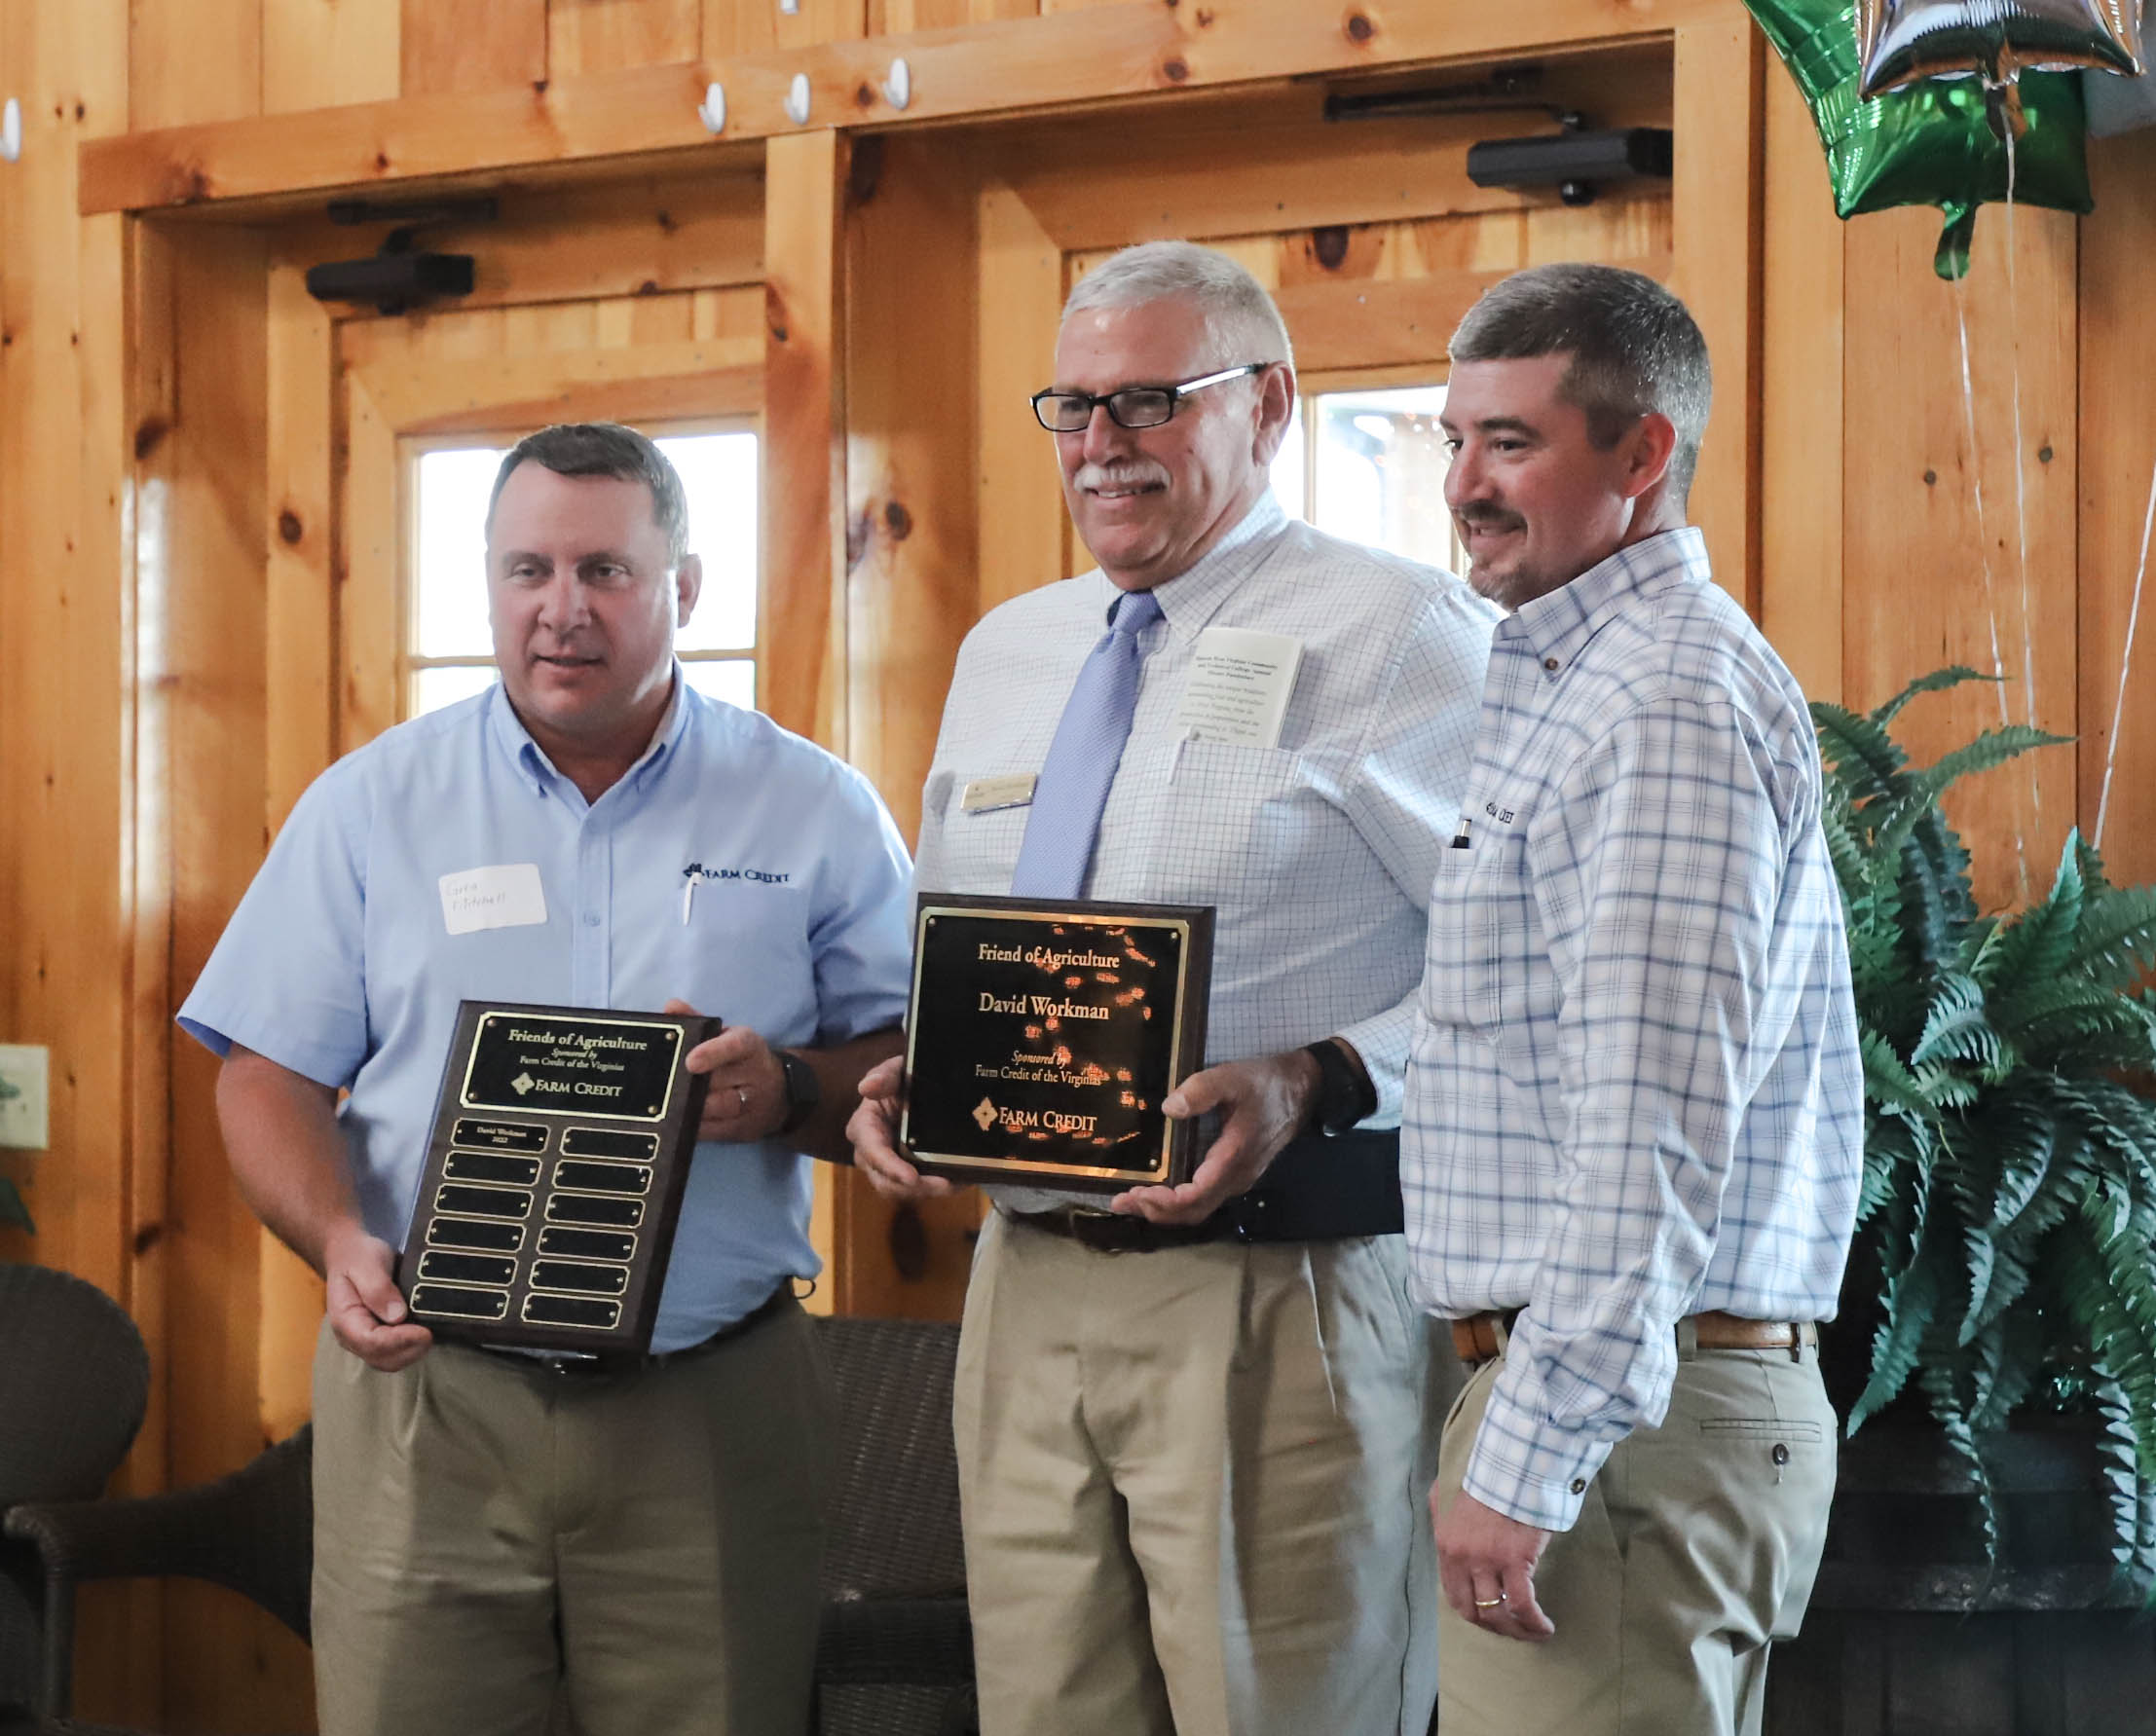 David Workman (center) stands with Greg Mitchell and Trey Keyser of Farm Credit of the Virginias after Workman received the Friend of Agriculture award.